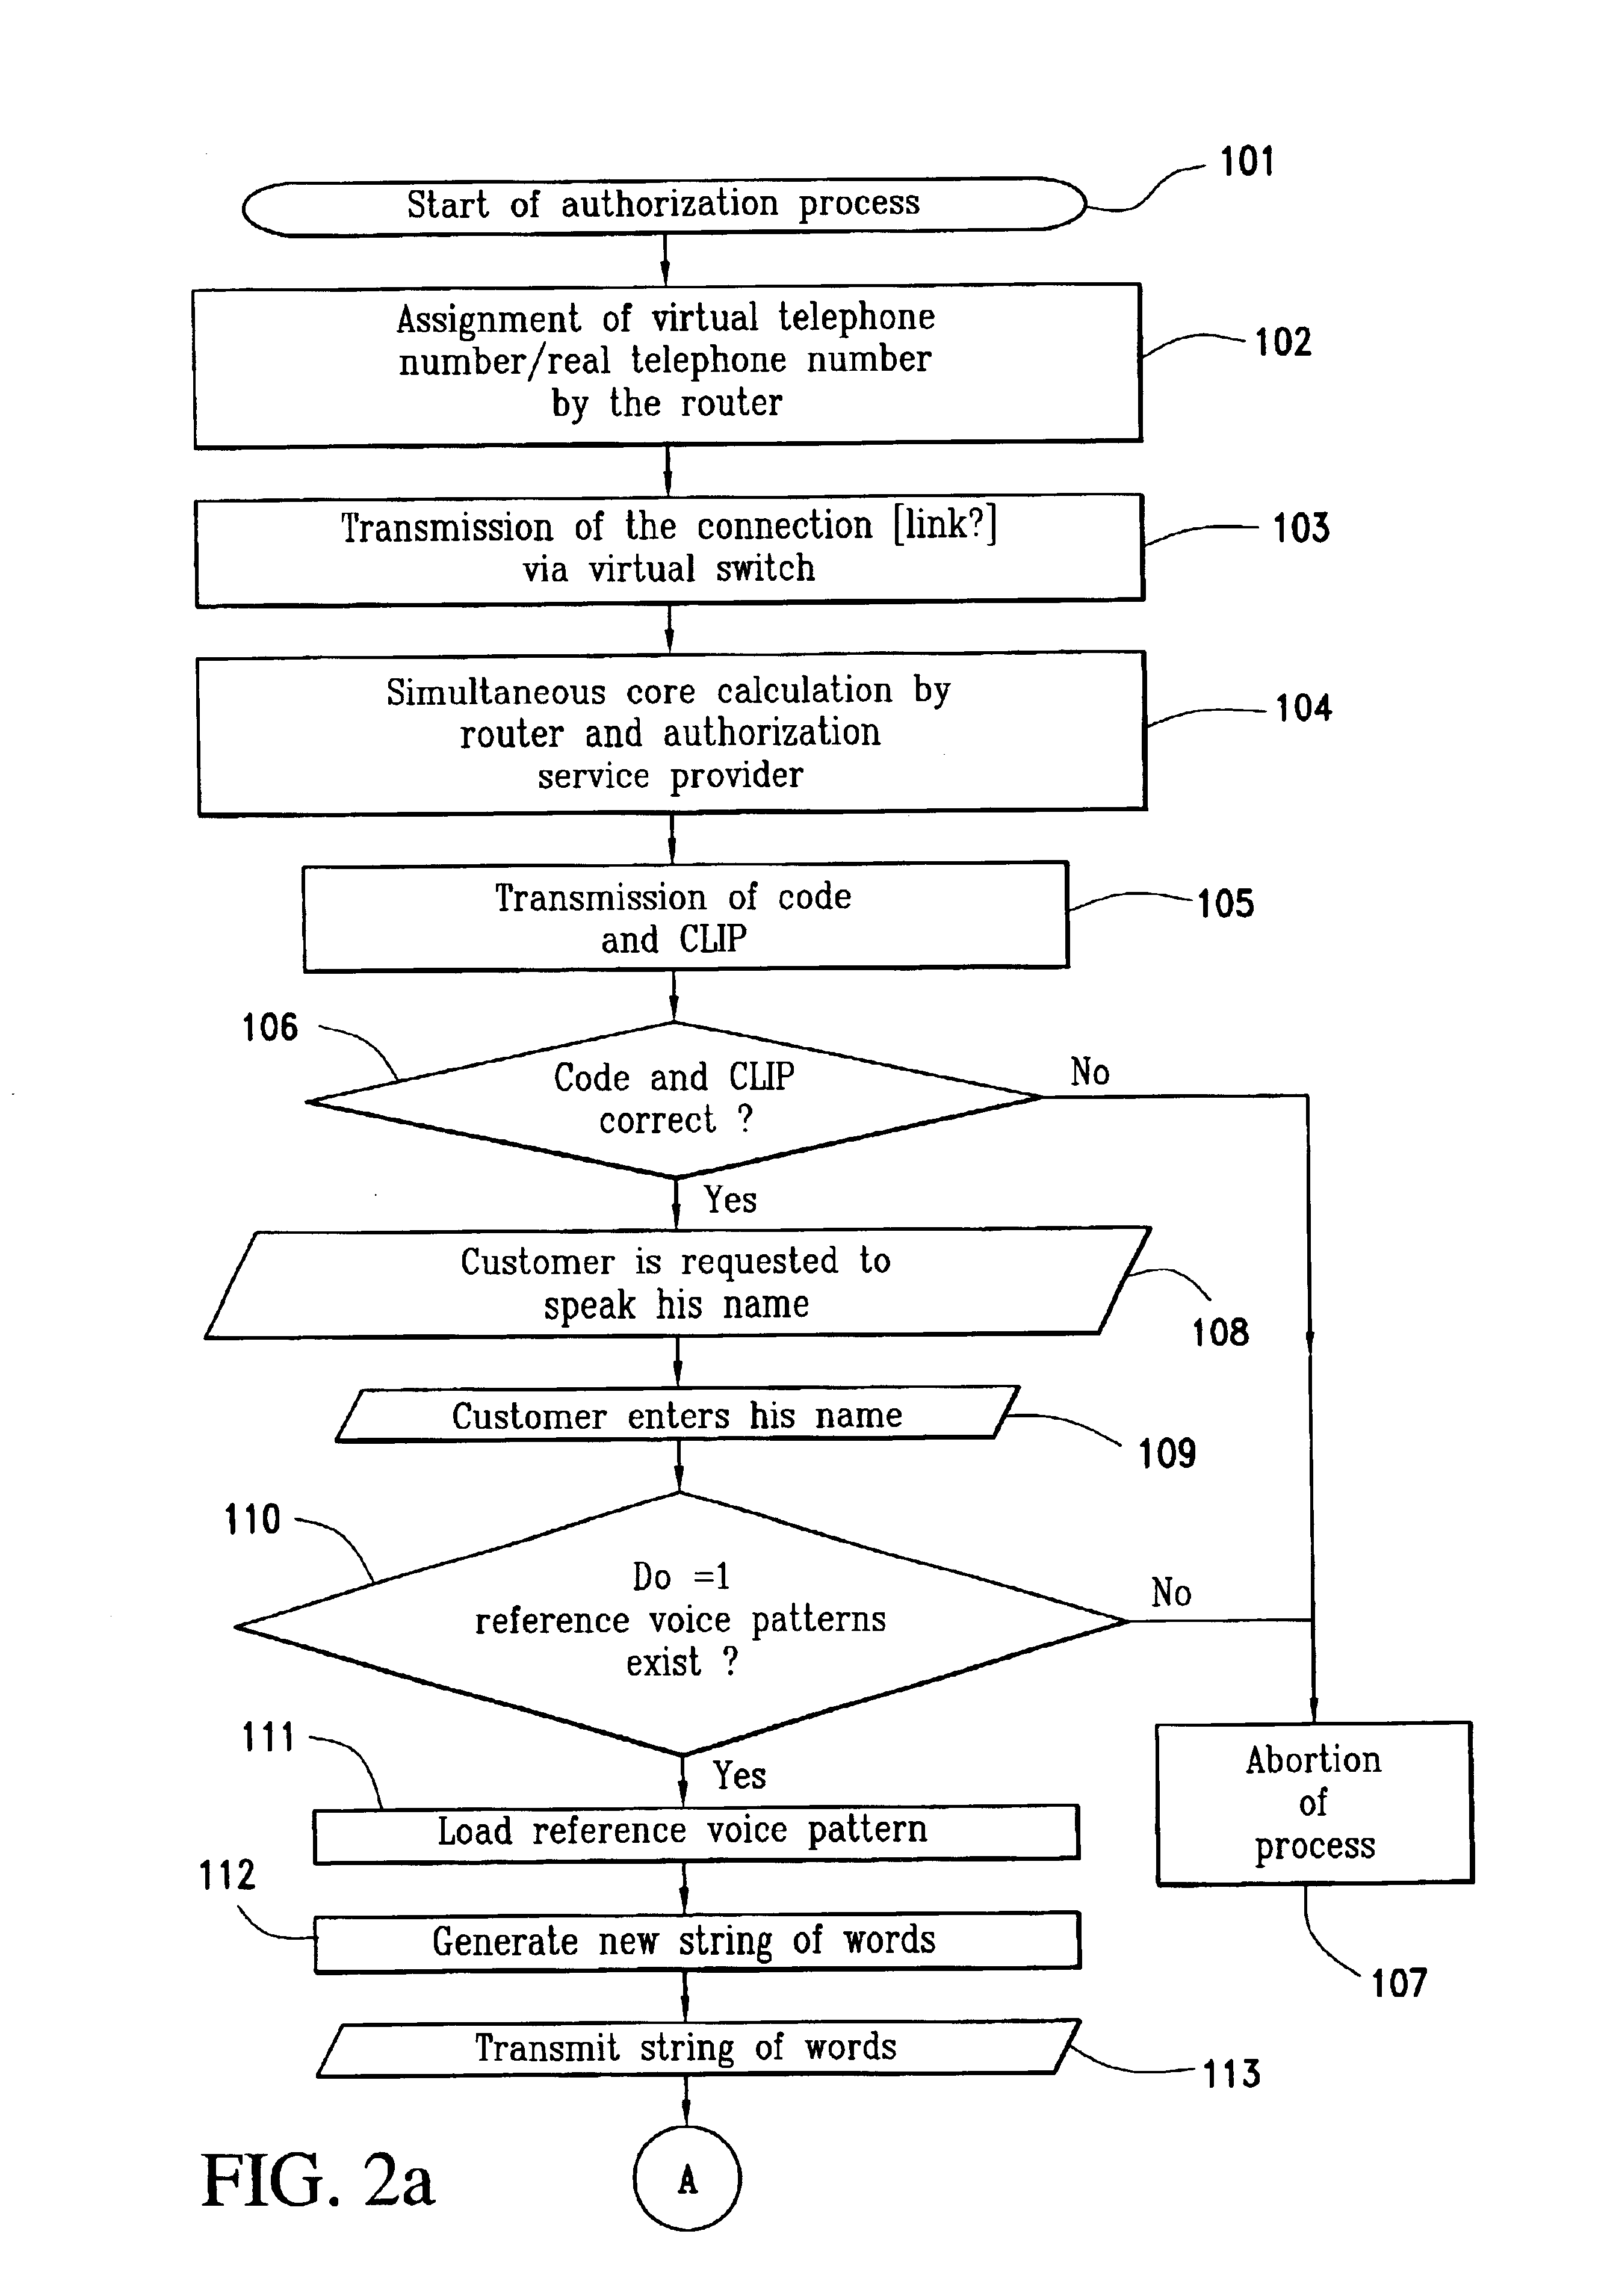 Method and system for authorizing a commercial transaction